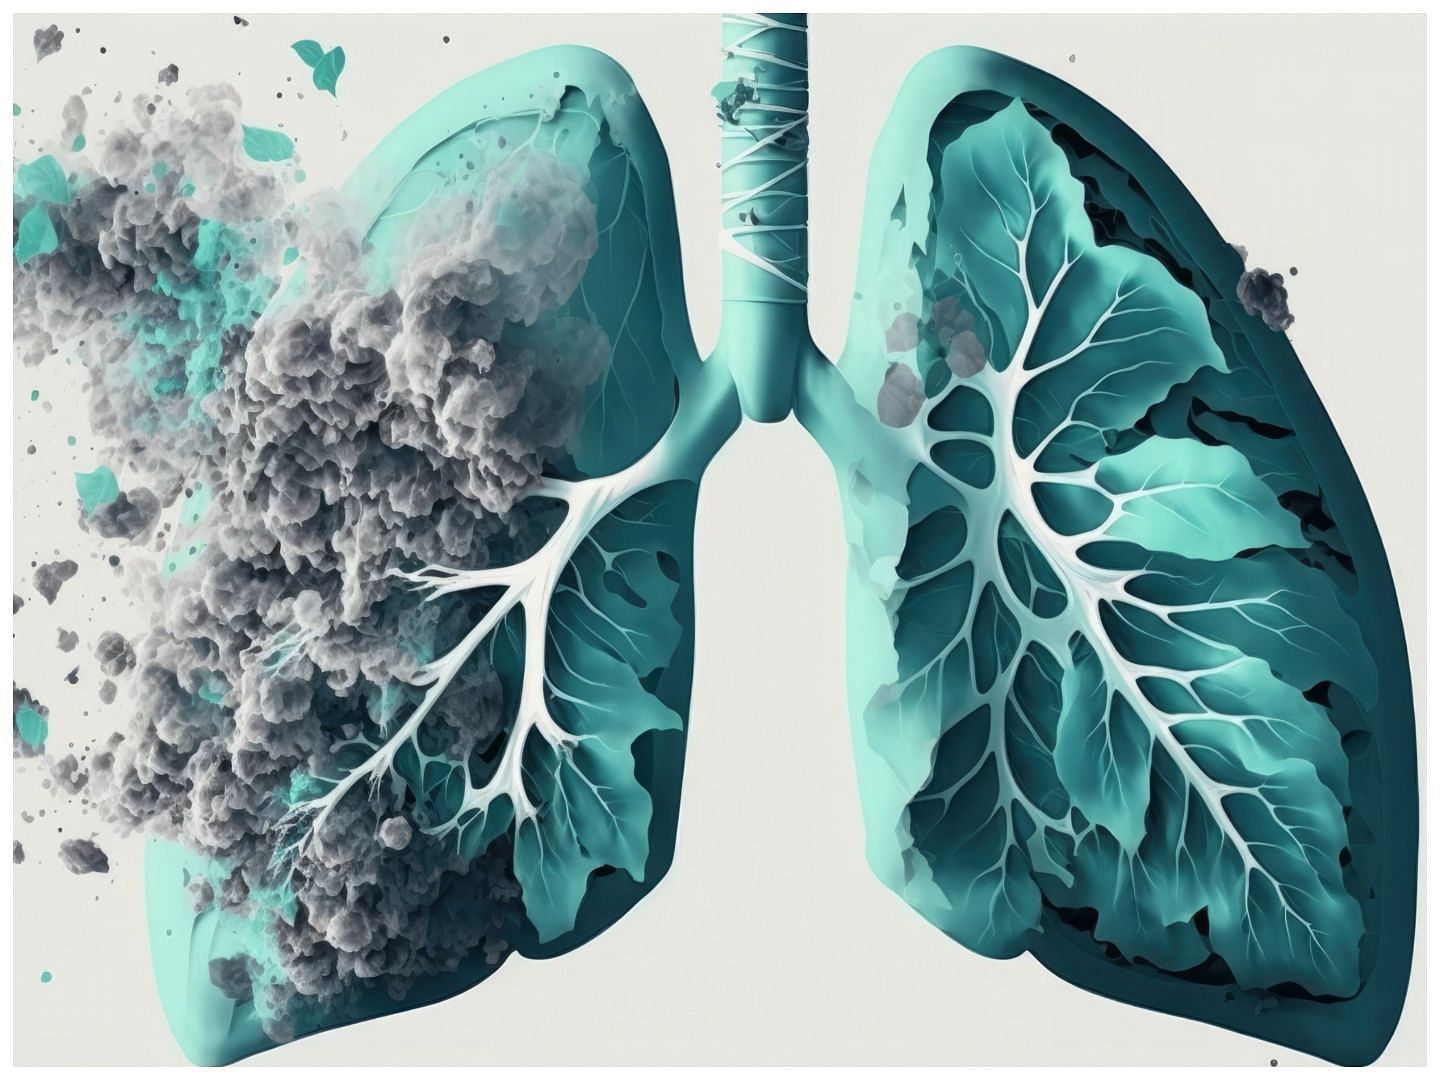 Lung cancer can be reason for rib pain (Image via Vecteezy)